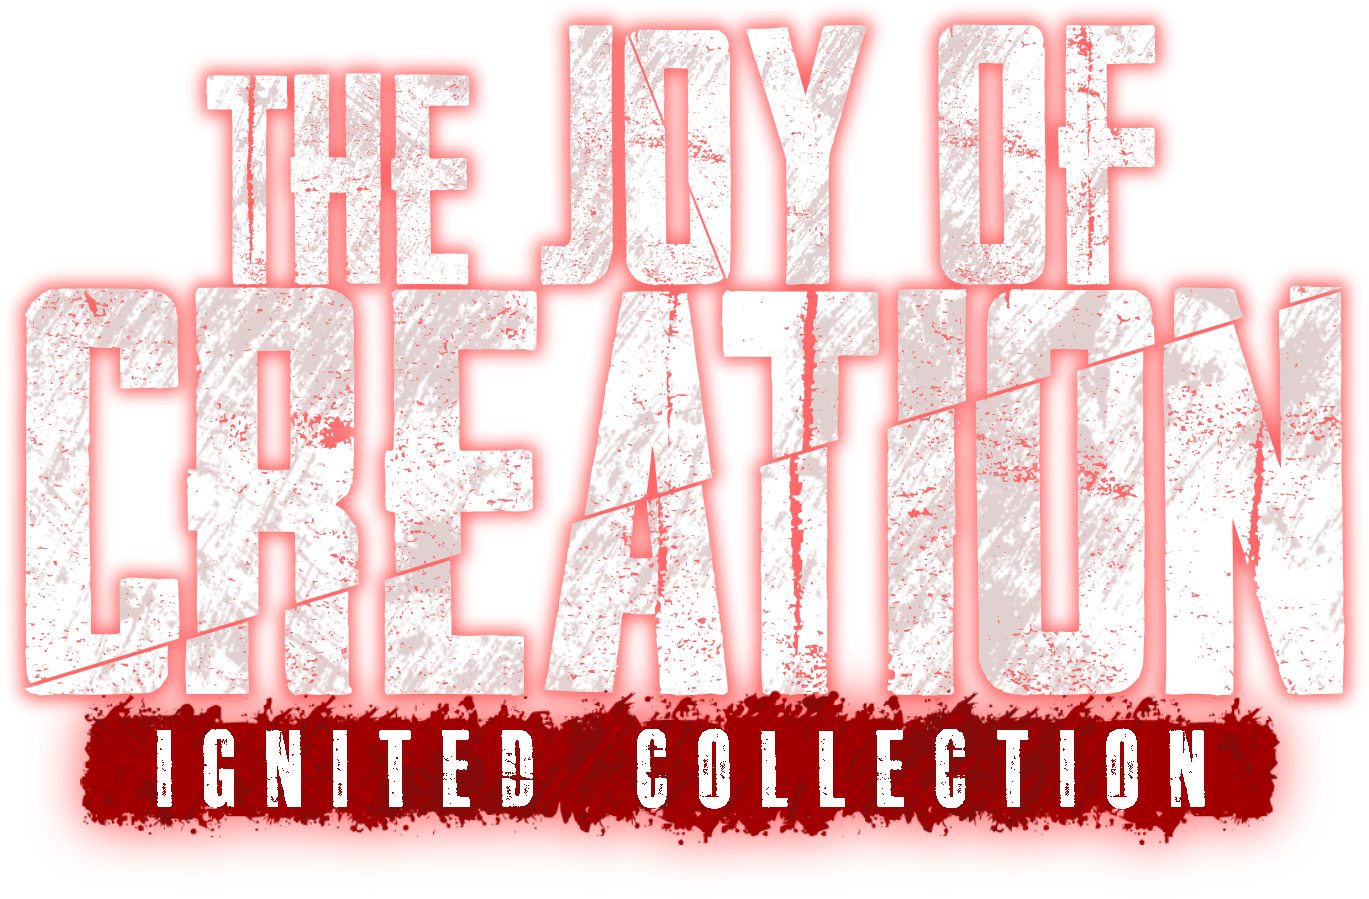 Grid for The Joy of Creation: Ignited Collection by Violett